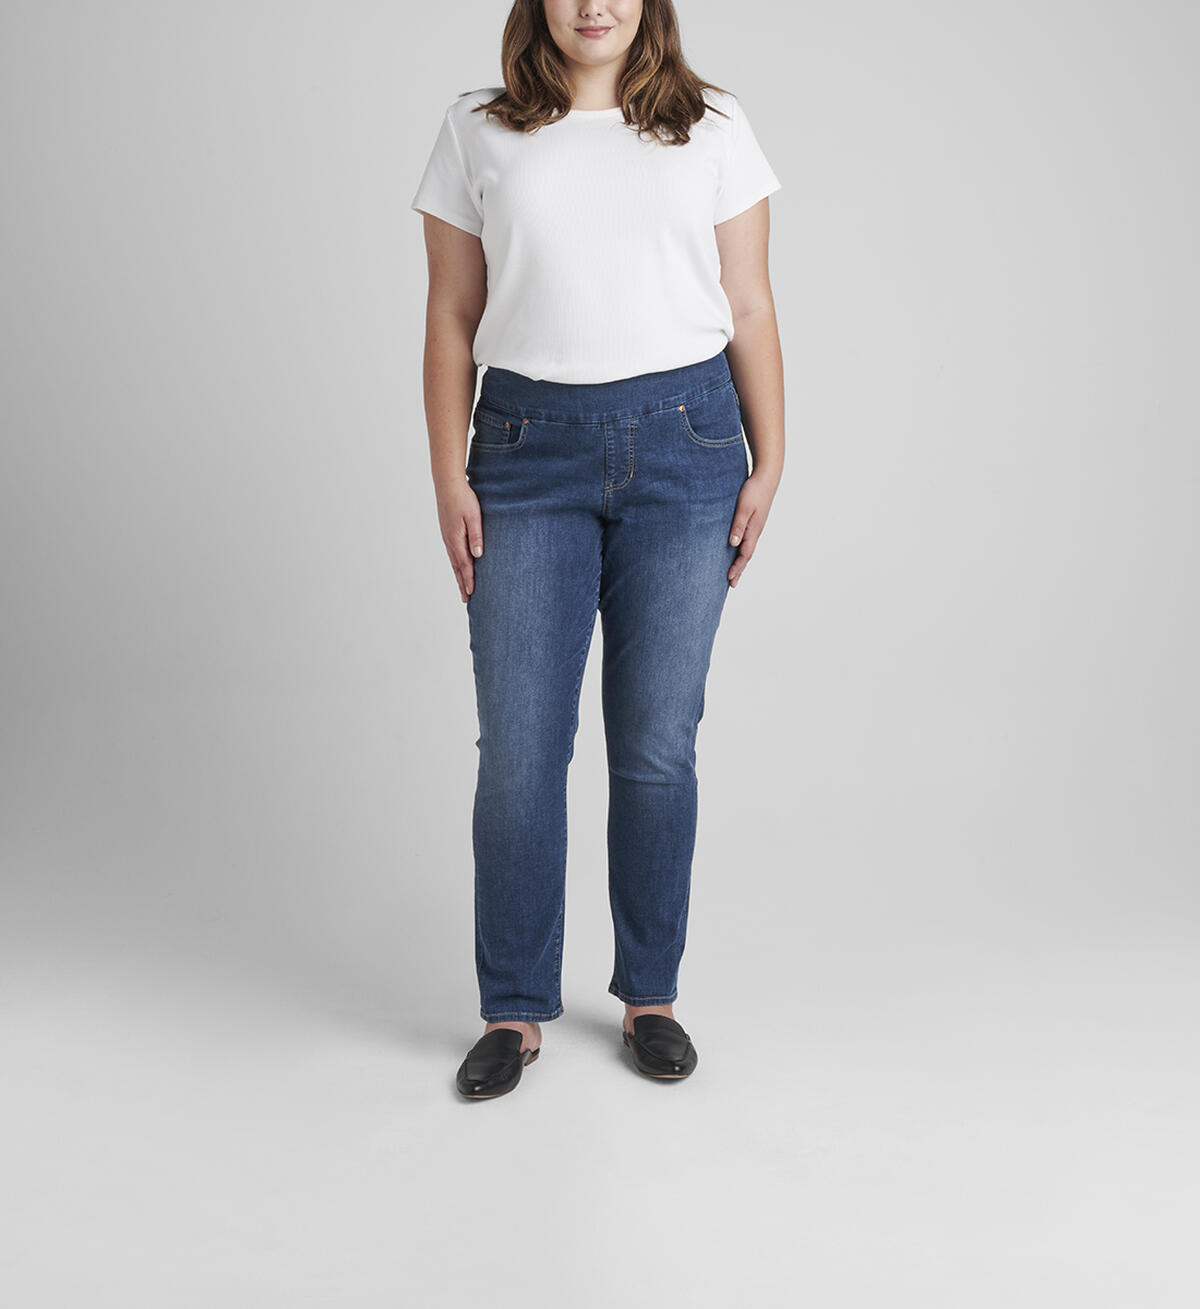 Nora Mid Rise Skinny Pull-On Jeans Plus Size, , hi-res image number 0